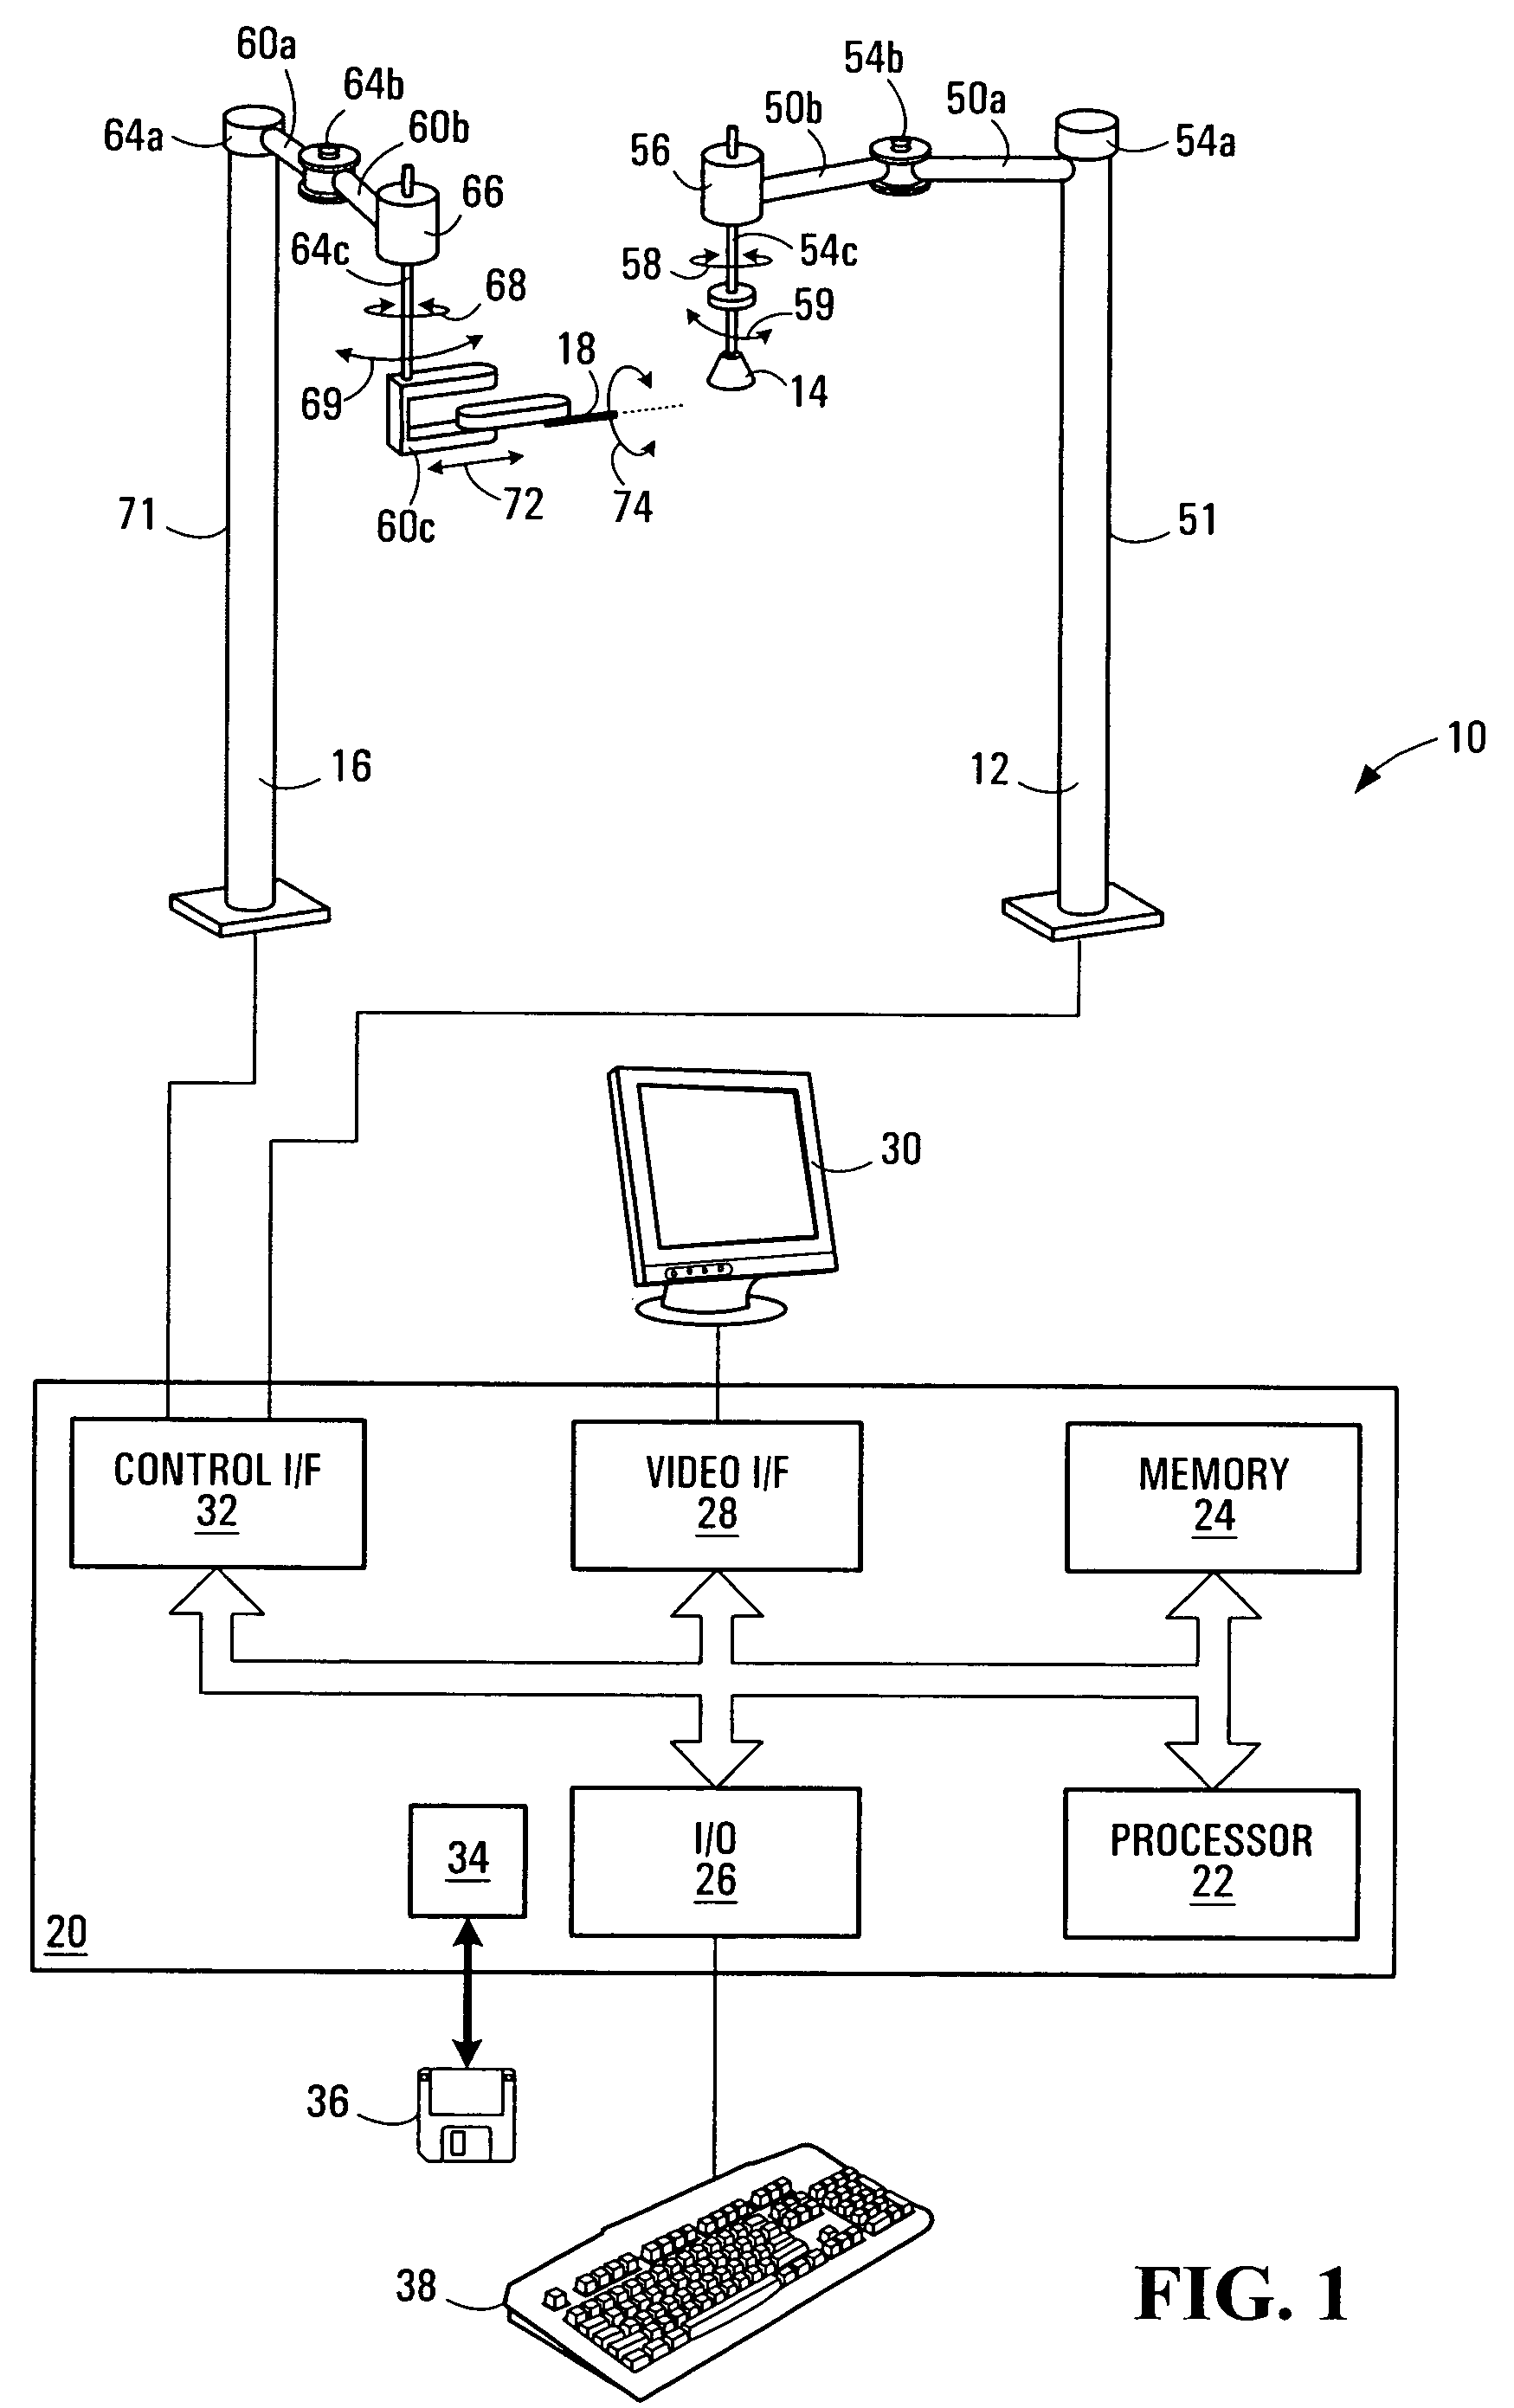 Apparatus and method for removing abnormal tissue